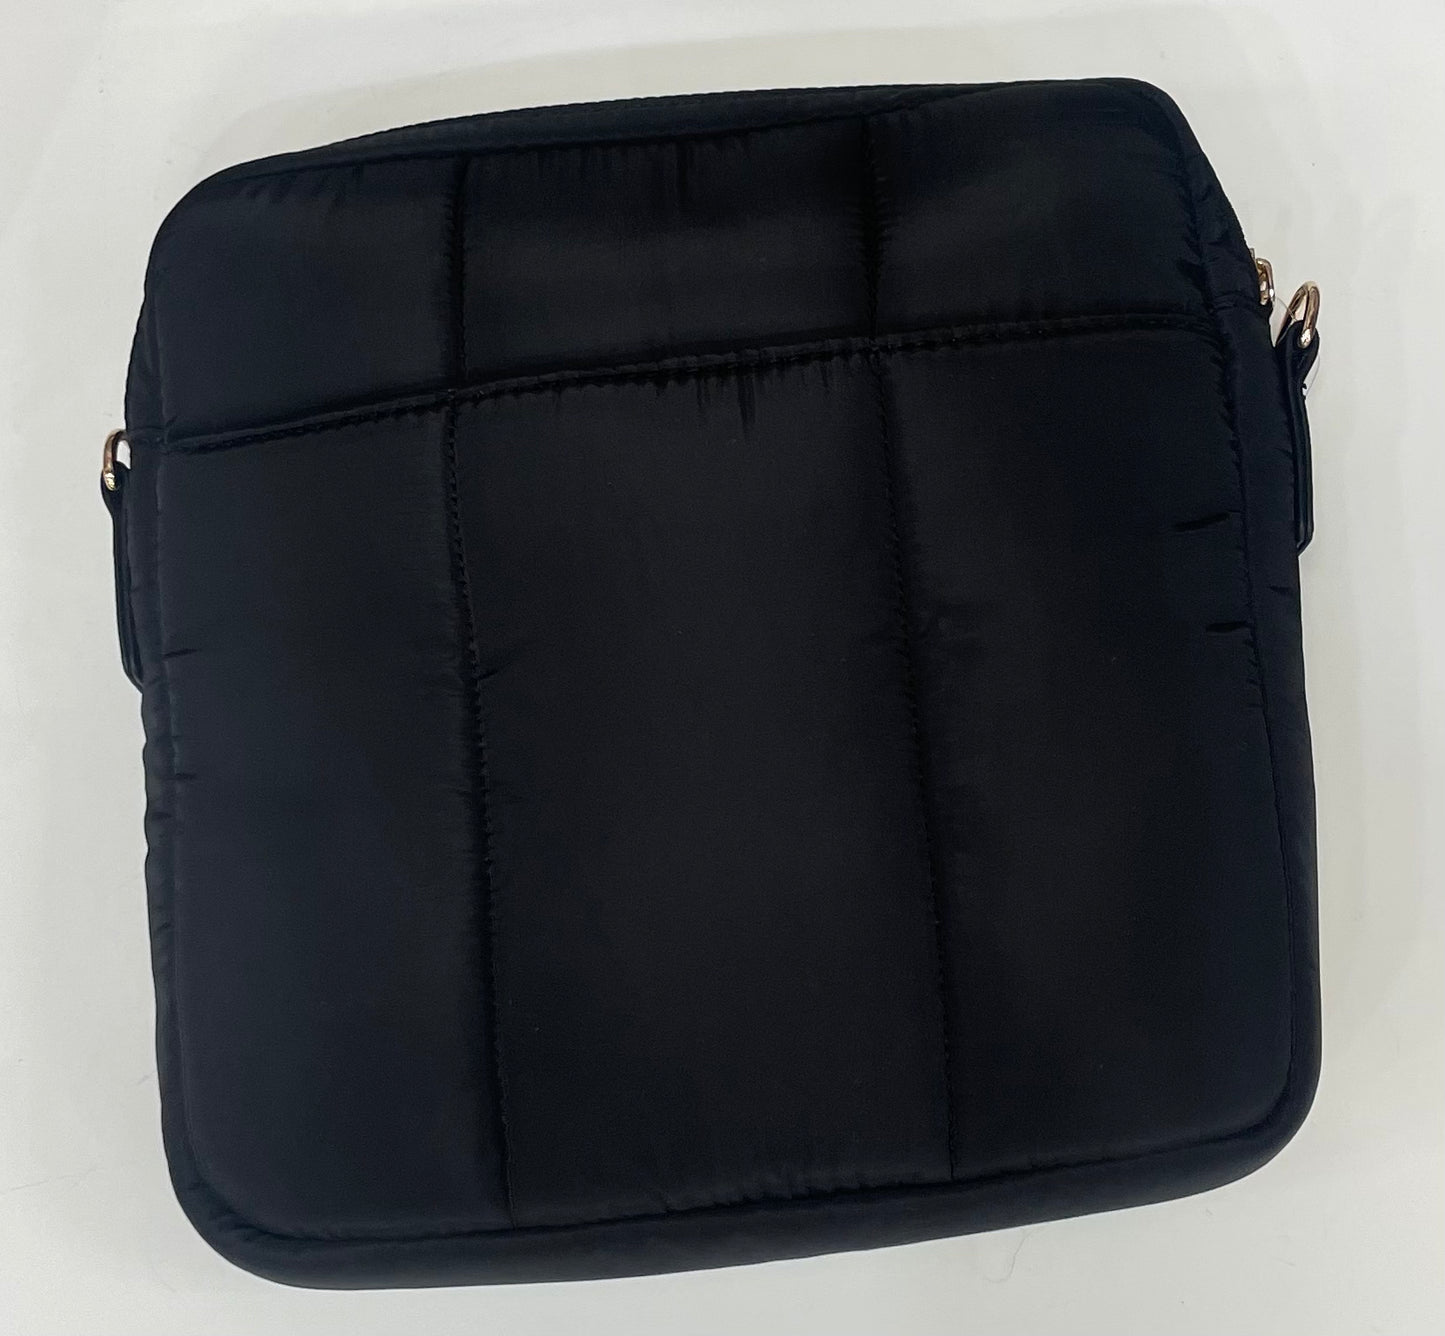 Chinese Laundry Black Puffer Bag With Strap